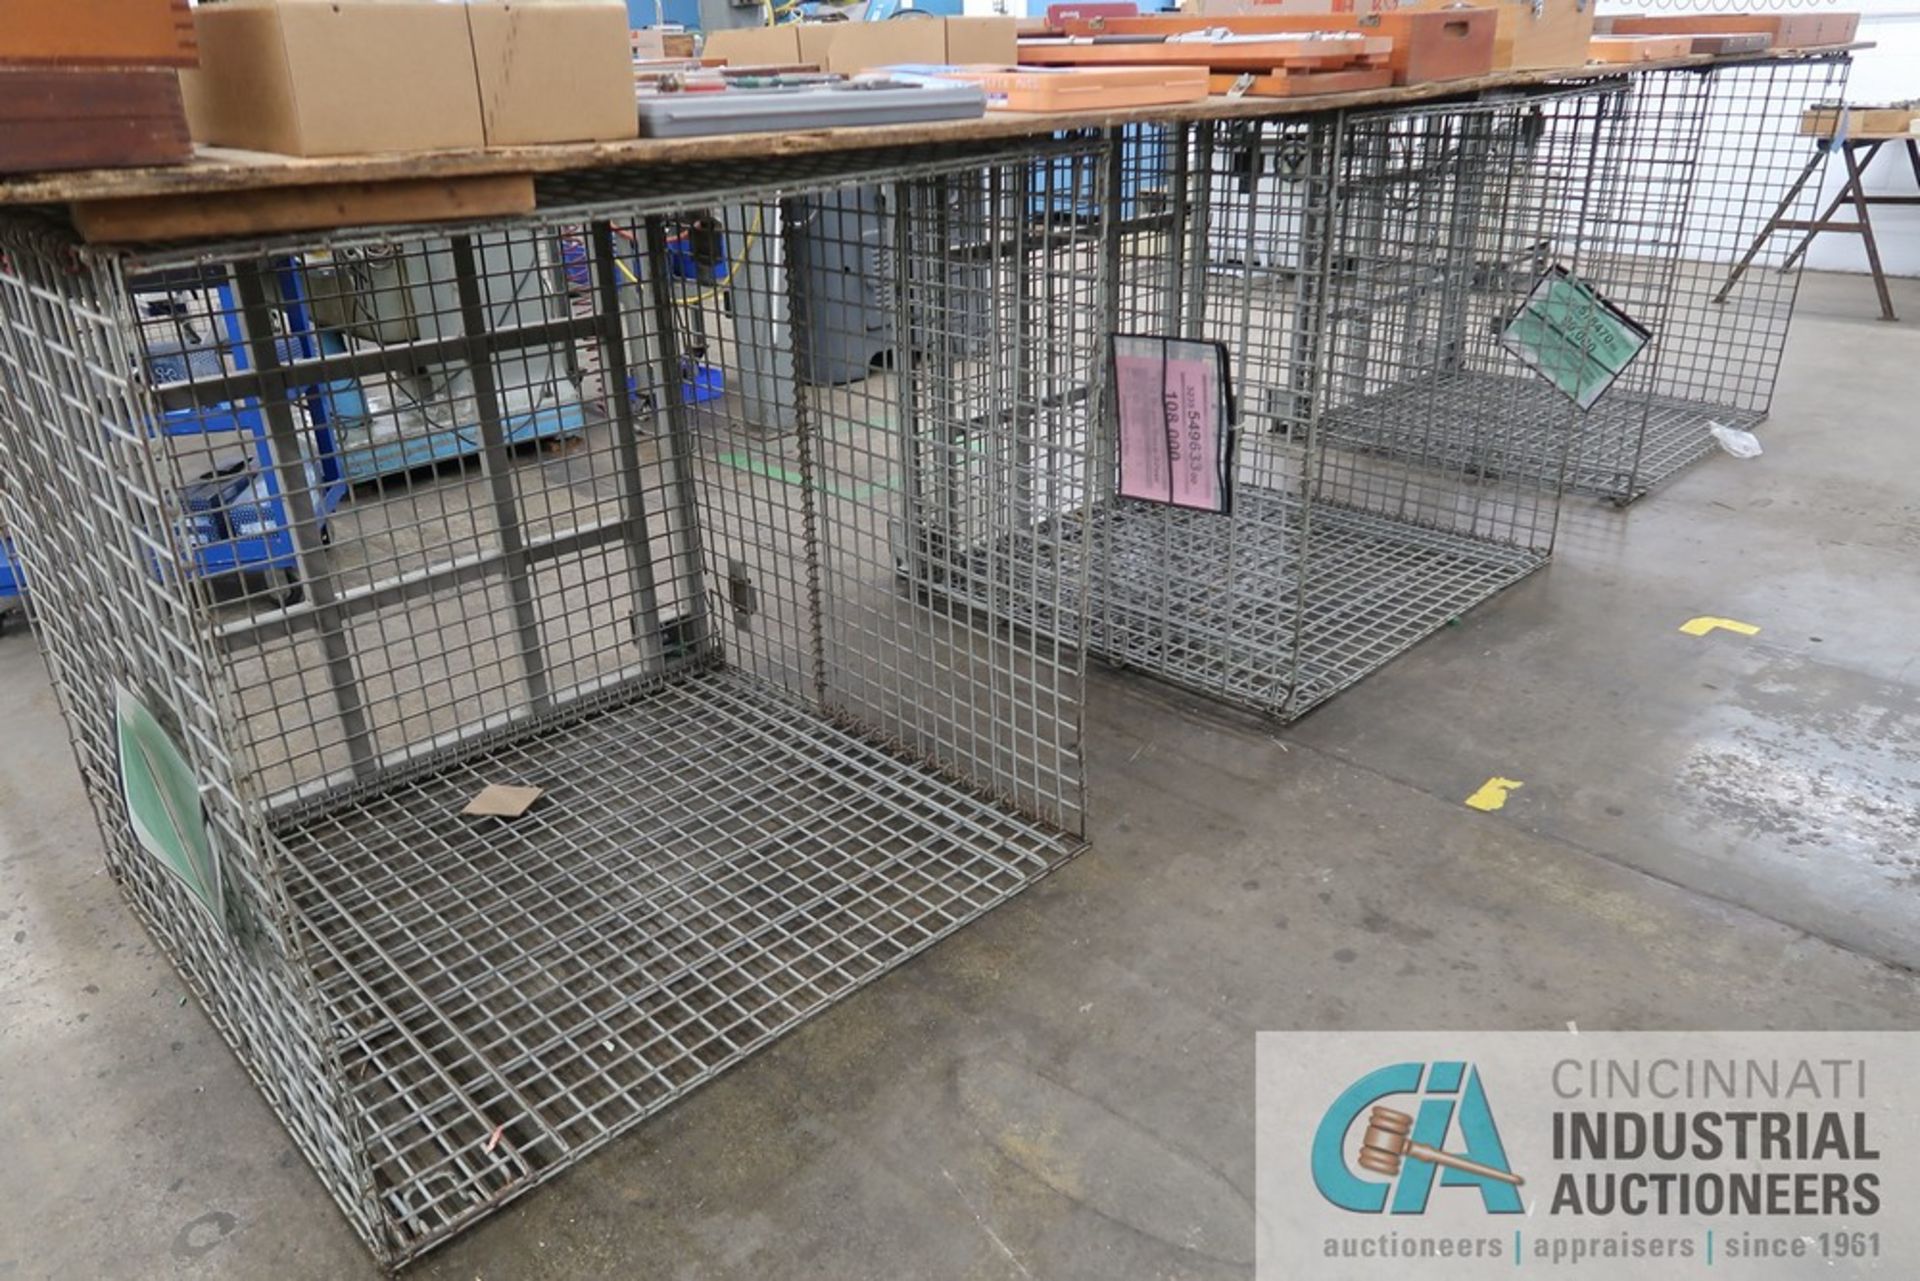 ****42" X 46" X 42" DEEP COLLAPSIBEL / STACKABLE WIRE BASKETS **DELAY REMOVAL - PICKUP 8-11-2021** - Image 3 of 6